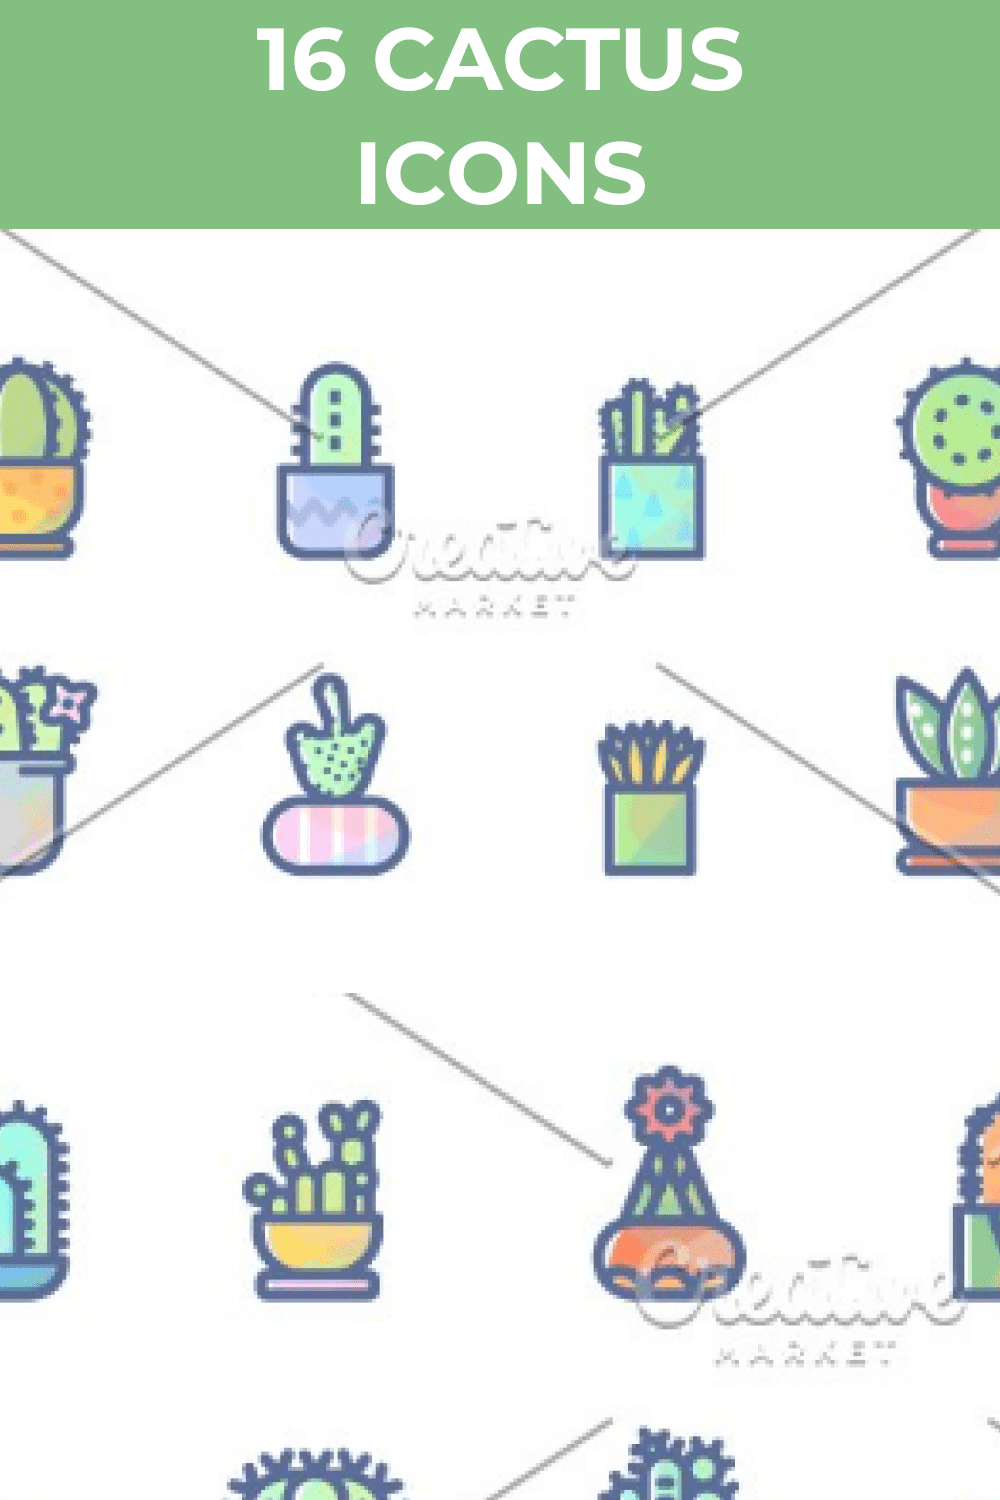 Use these cactus items for your purposes.